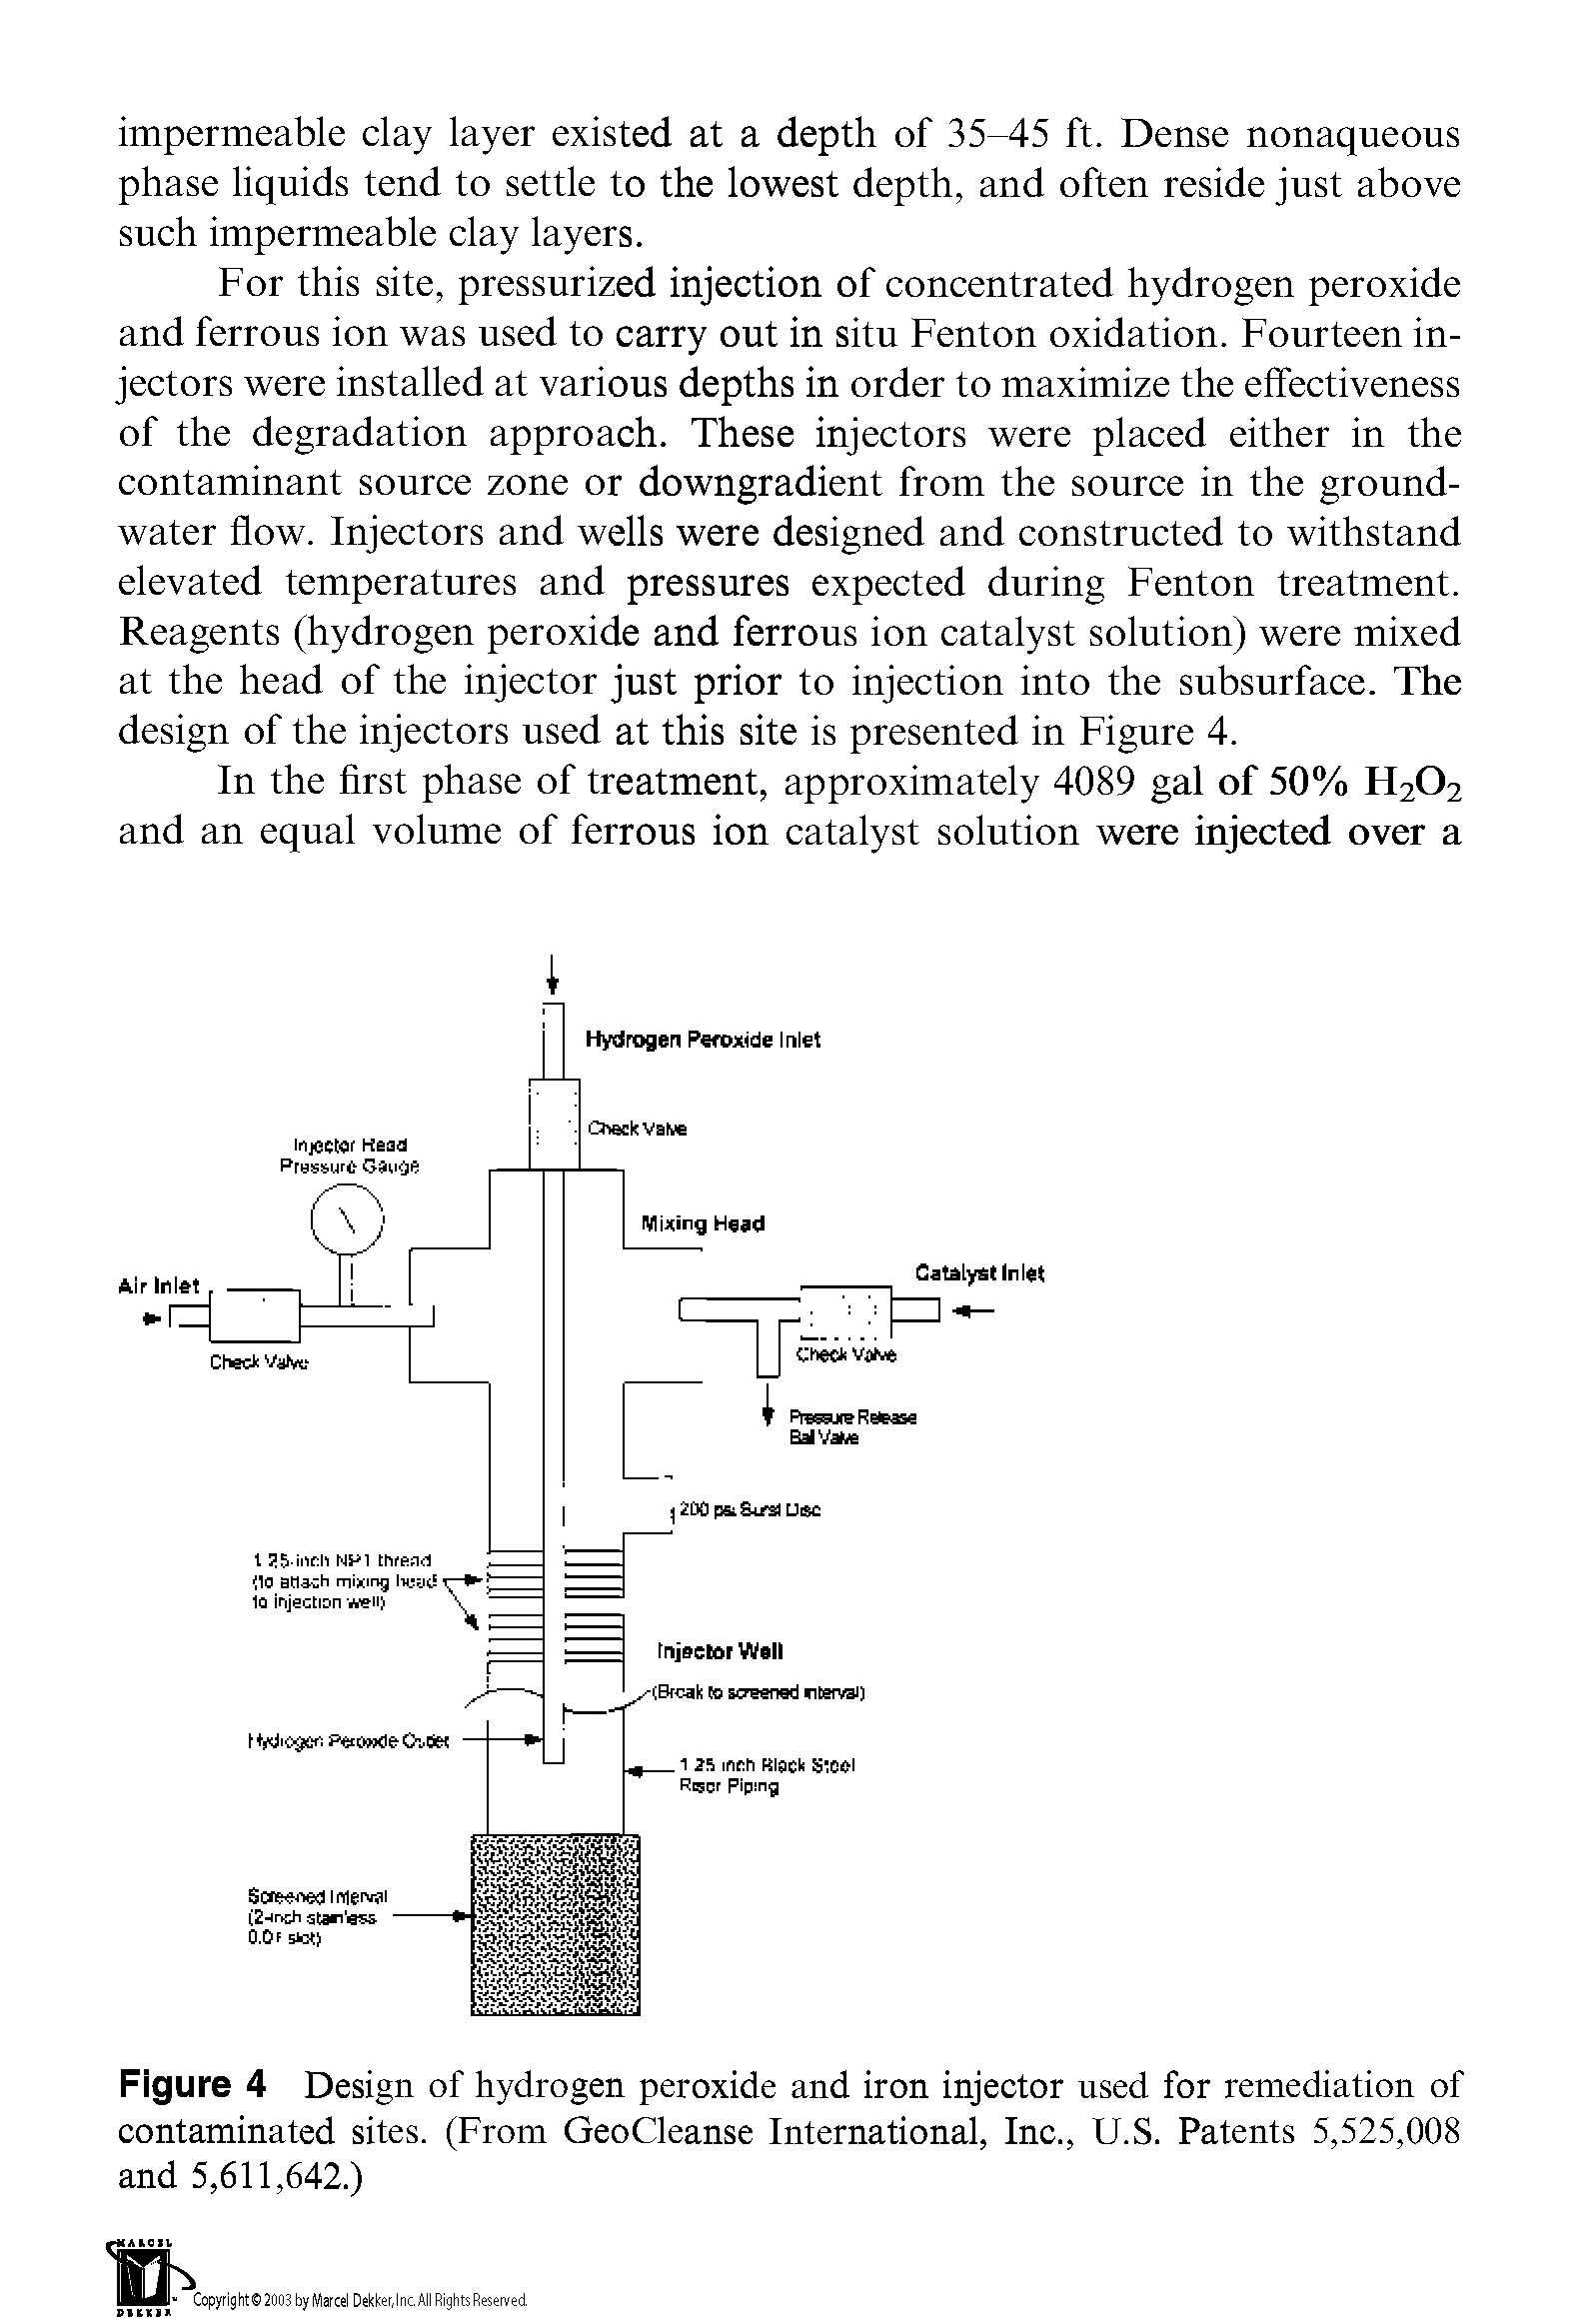 Figure 4 Design of hydrogen peroxide and iron injector used for remediation of contaminated sites. (From GeoCleanse International, Inc., U.S. Patents 5,525,008 and 5,611,642.)...